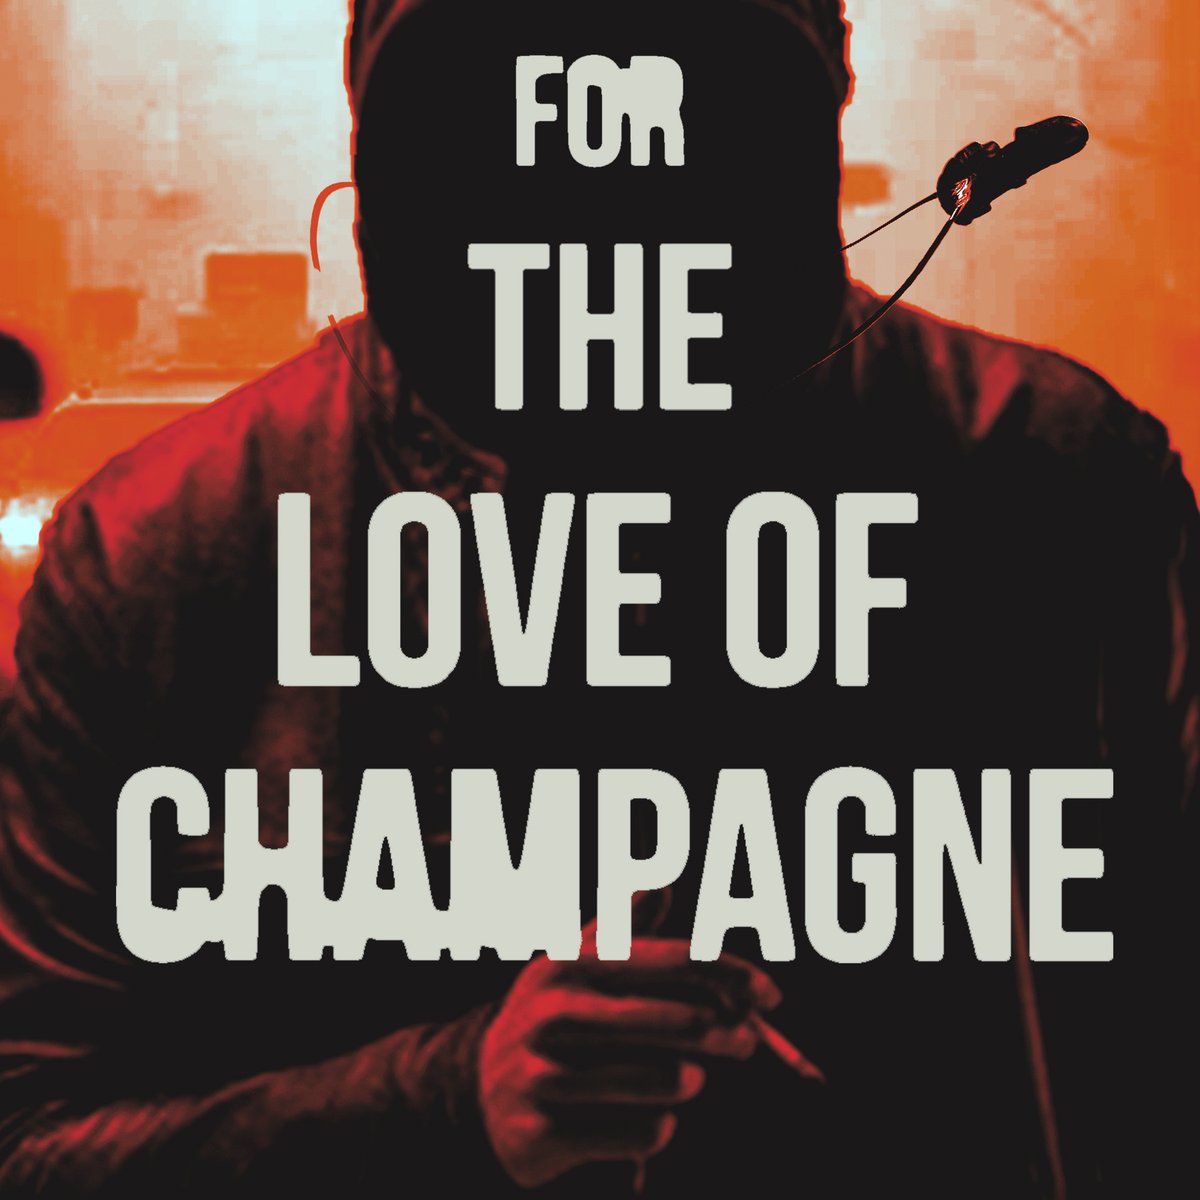 A tale of corruption, a magical negro, and the transformative properties of violence - 'For the Love of Champagne' by J. Monroe Adams, is available in paperback, hardcover and on #Kindle 

books2read.com/u/mlMYZq 

#crime #NextChapterPub #fiction #bookboost #INDIEBOOKBLAST